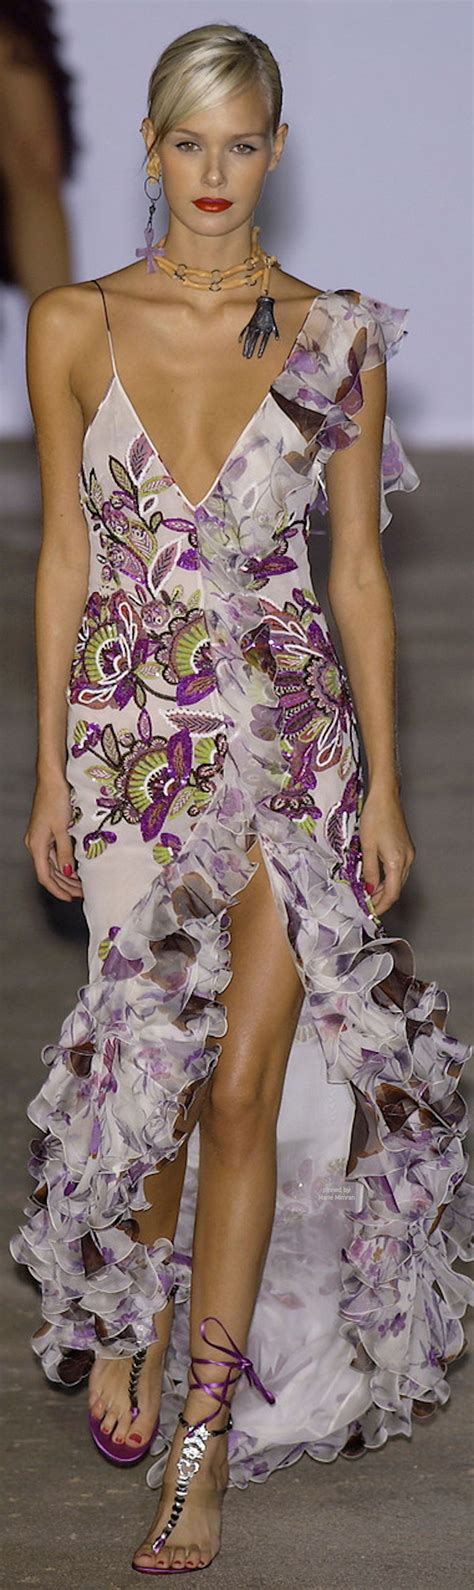 Emanuel Ungaro Beautiful Gowns Beautiful Outfits Cool Outfits Floral